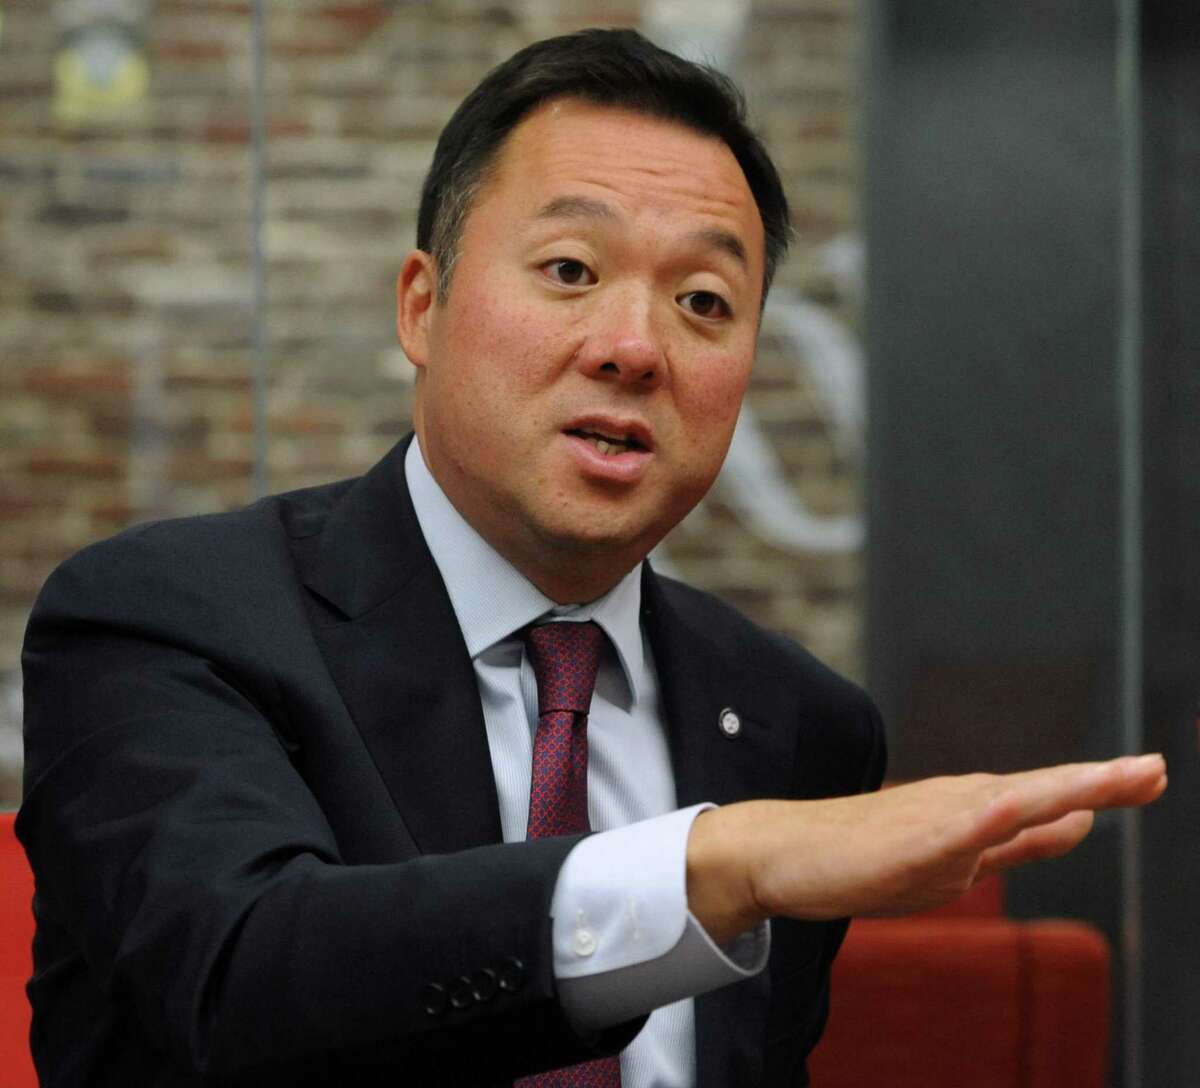 Connecticut Attorney General William Tong opposes Purdue Pharma’s settlement plan.